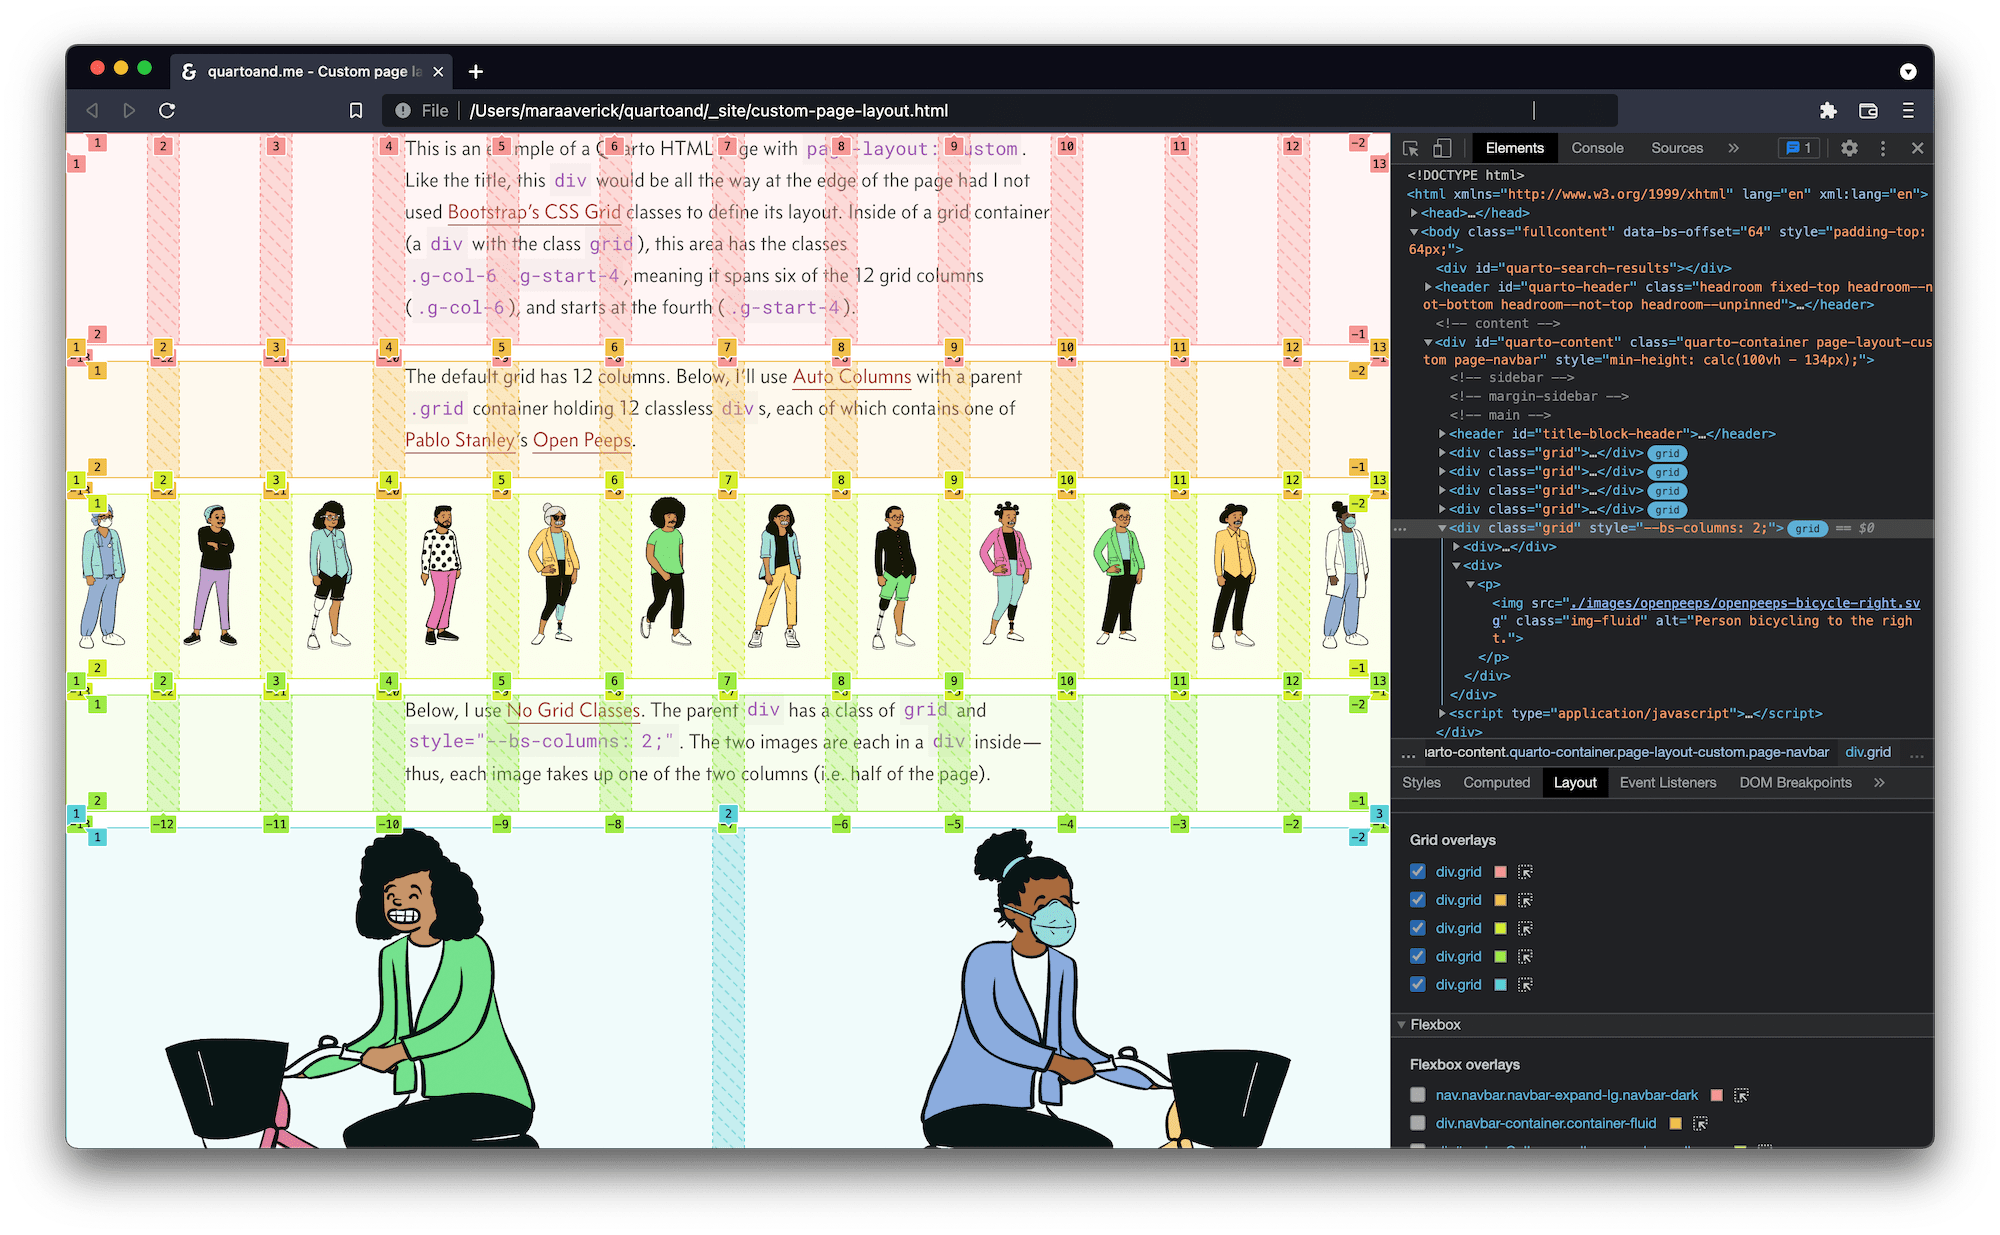 Screenshot of custom layout page with the browser grid inspector overlaid. Browser developer tools are shown in the left-hand section of the browser window.